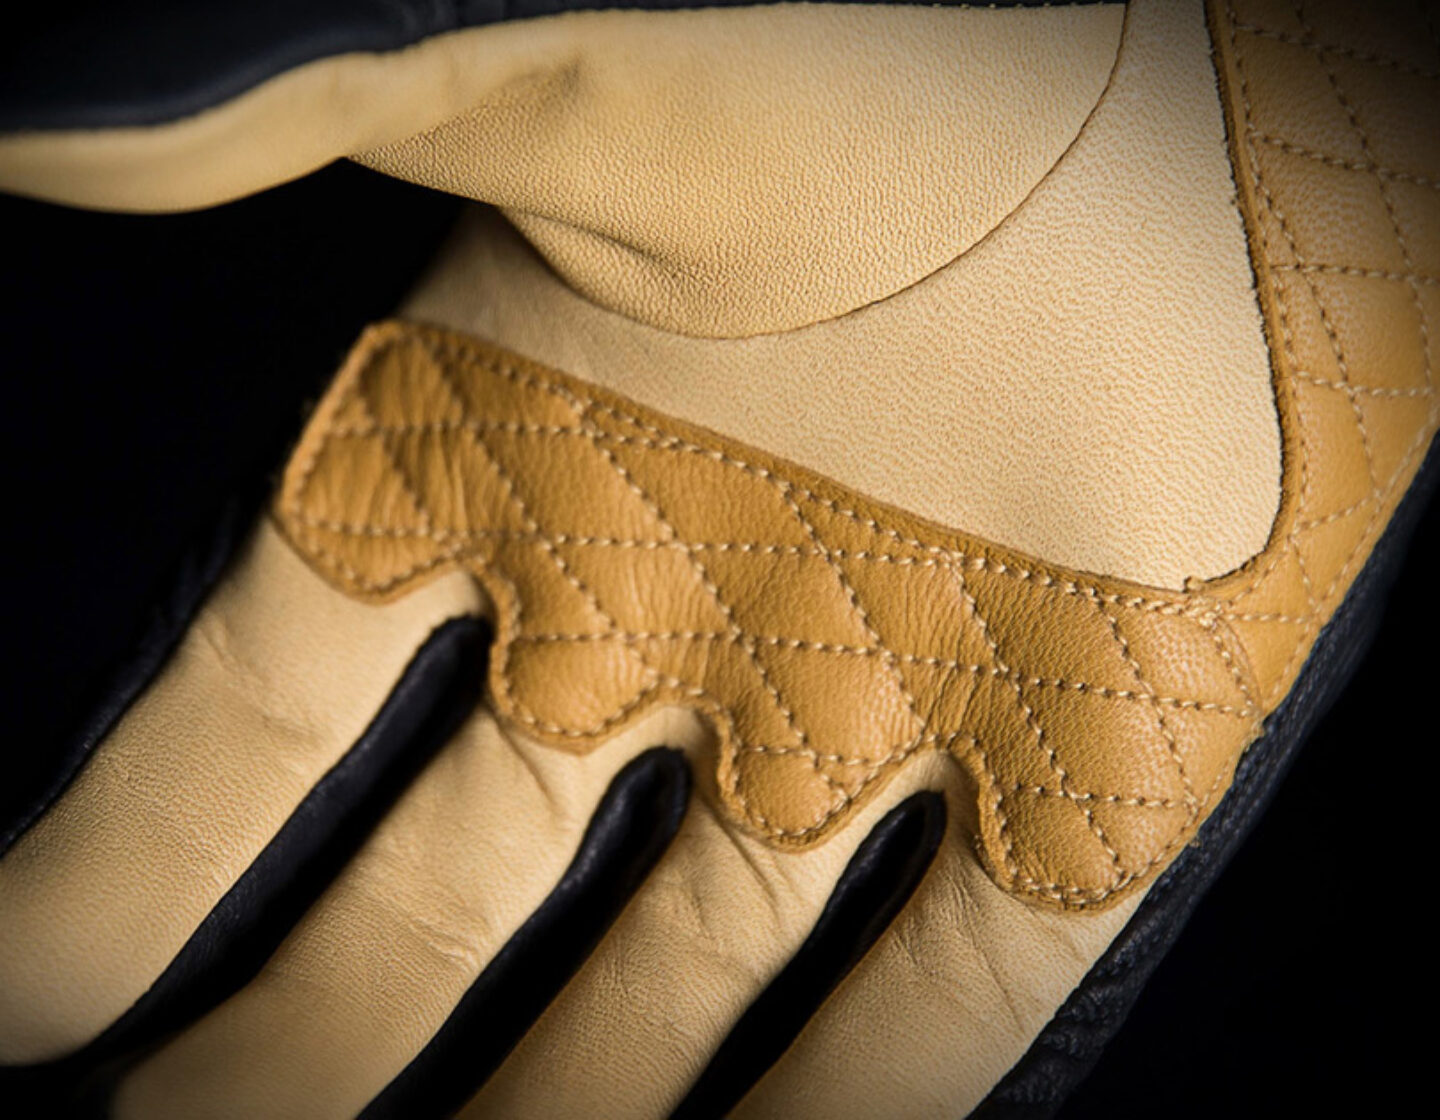 Icon 1000 Axys Gloves detail shot